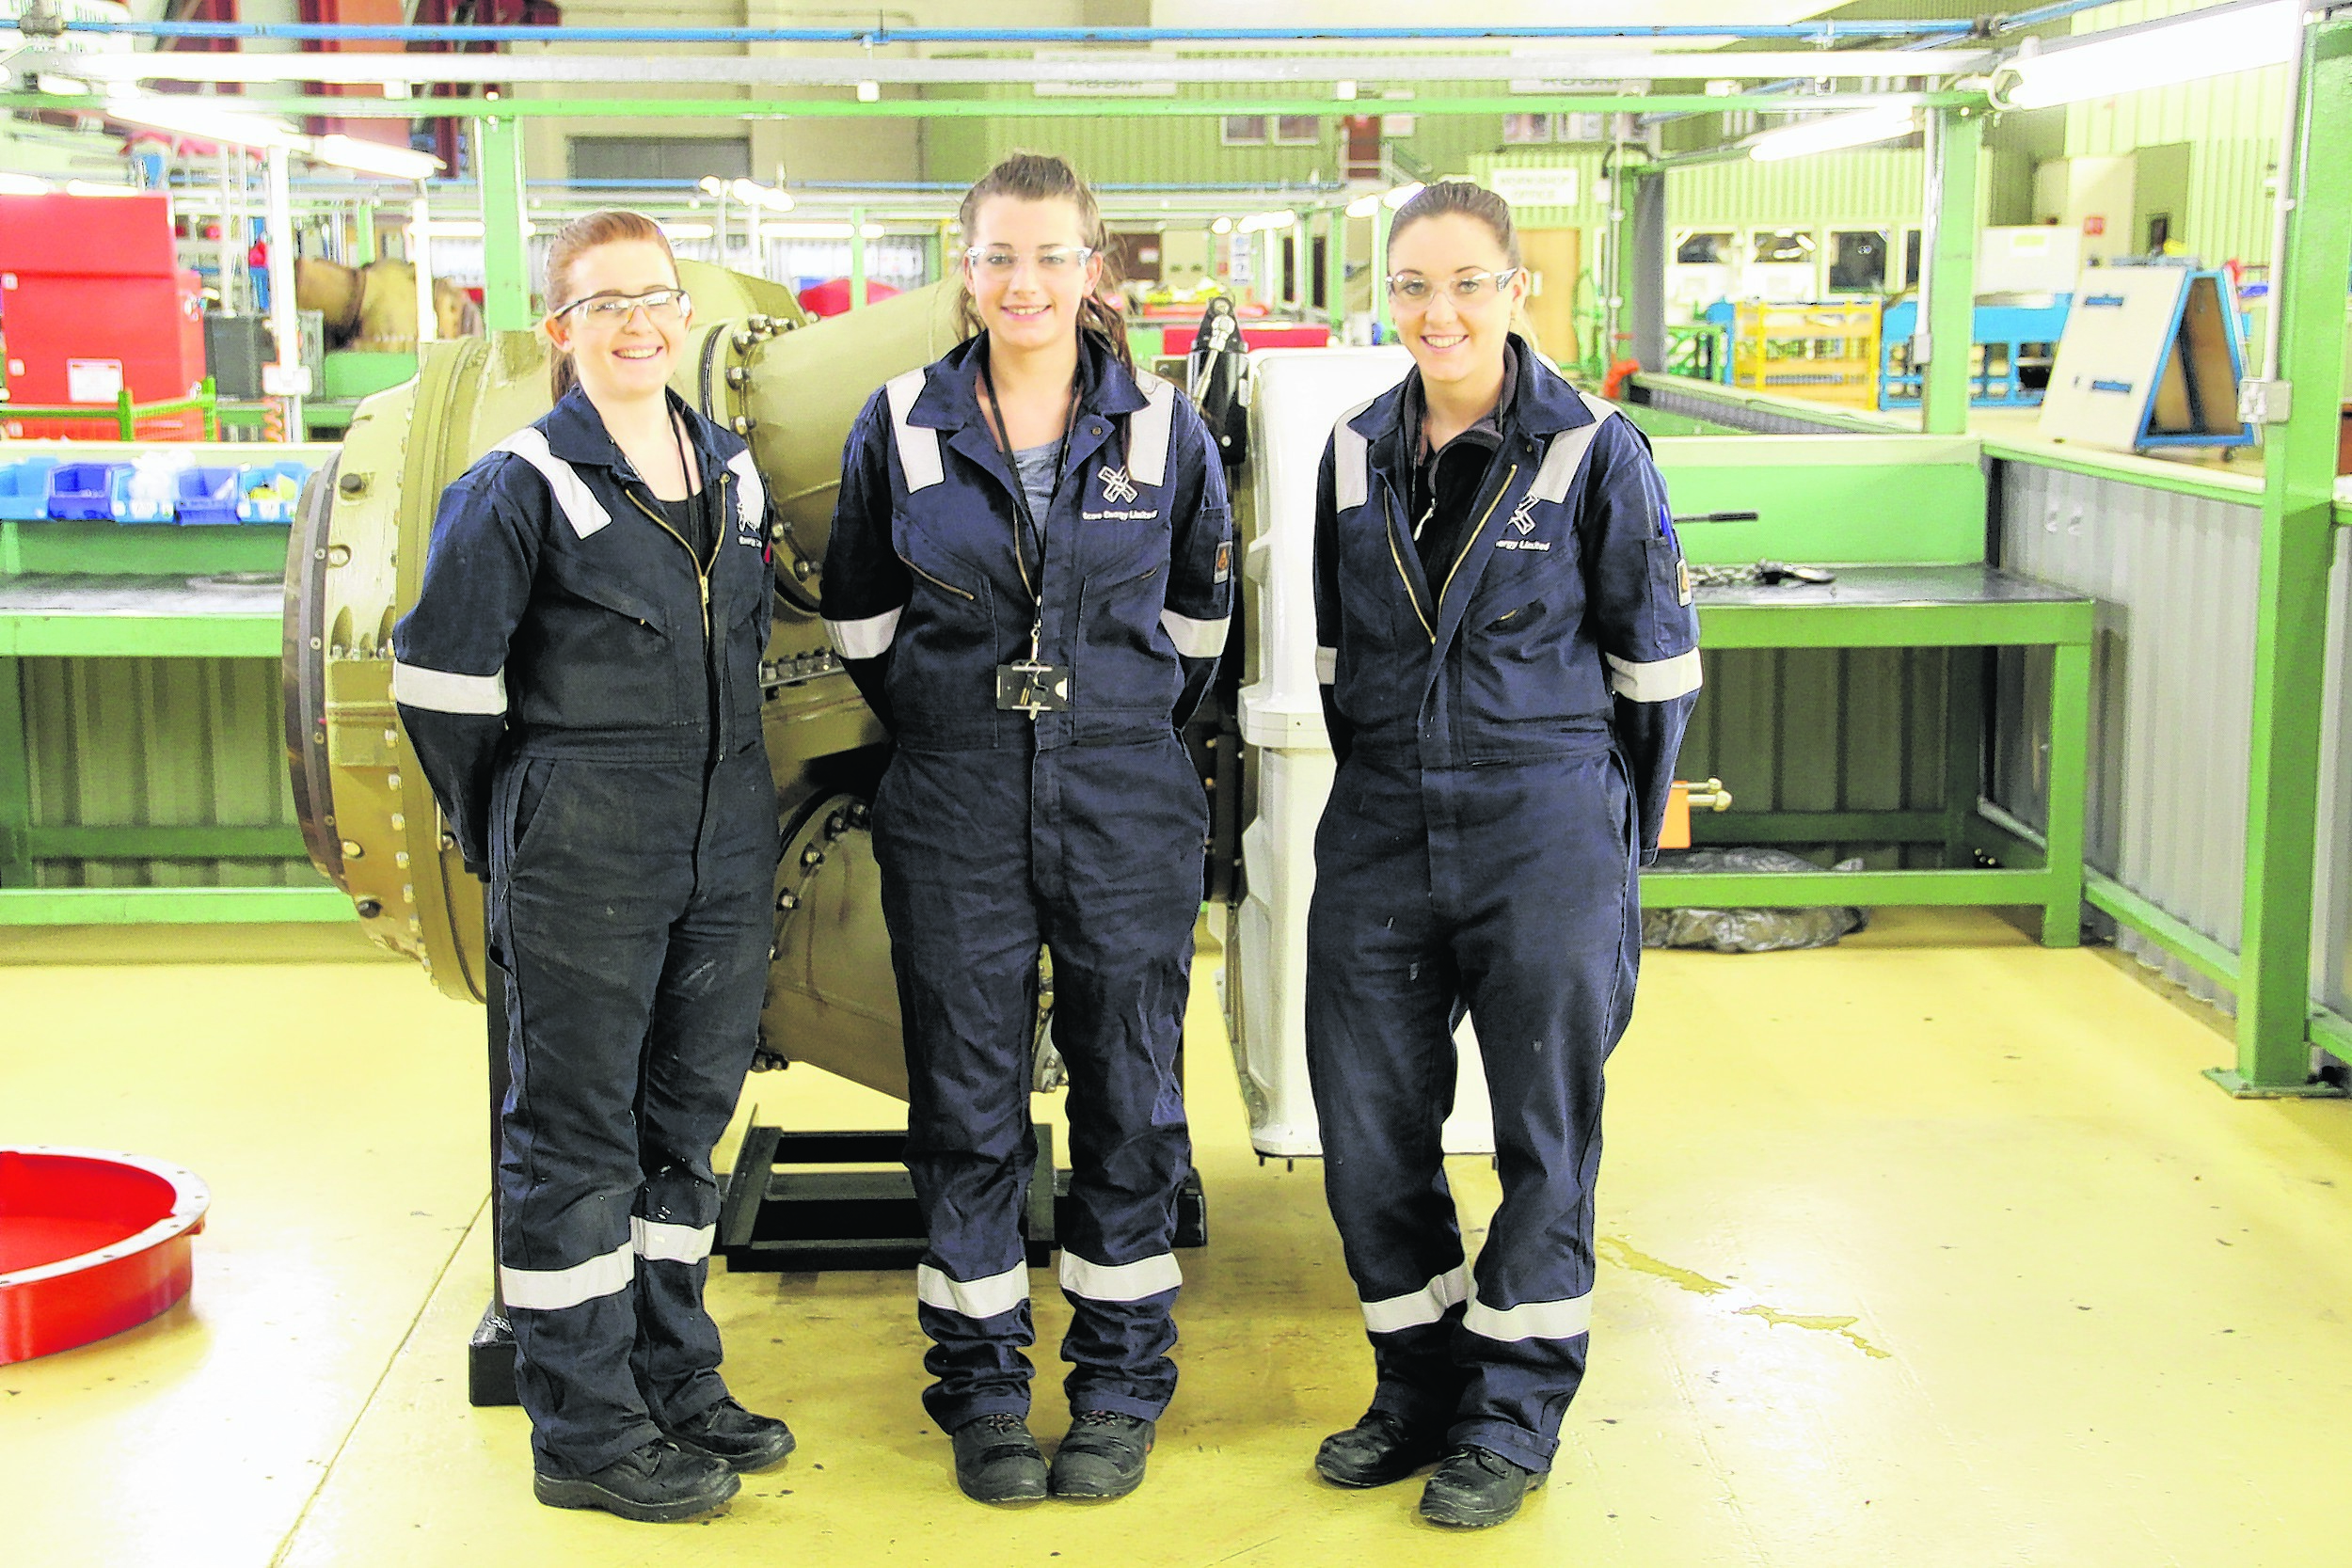 From left: apprentices Emma, Christine and Laura